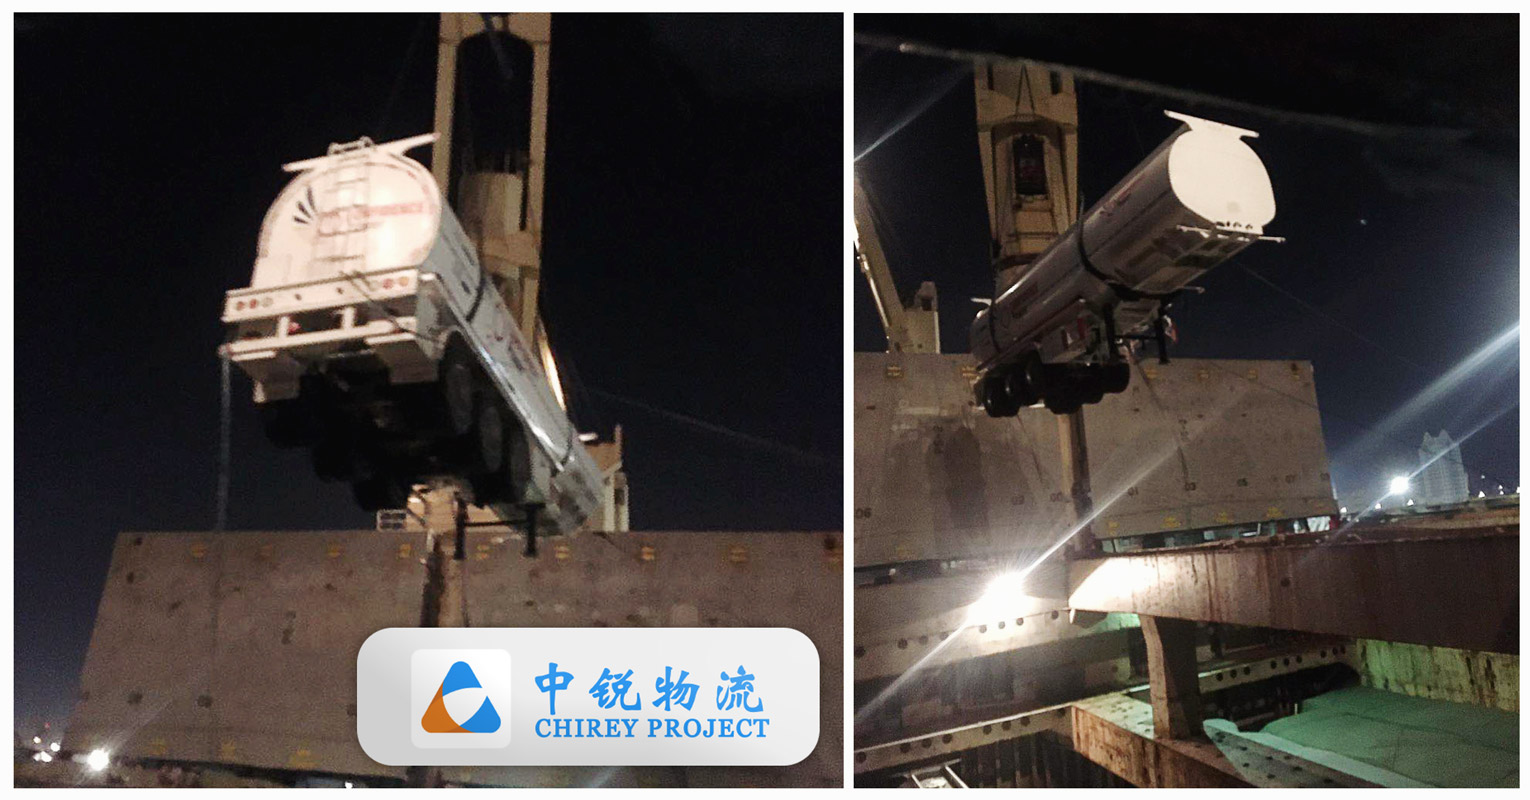 Chirey Projects Shipped Trailers from Qingdao to Chattogram , Bangladesh by Breakbulk Vessel